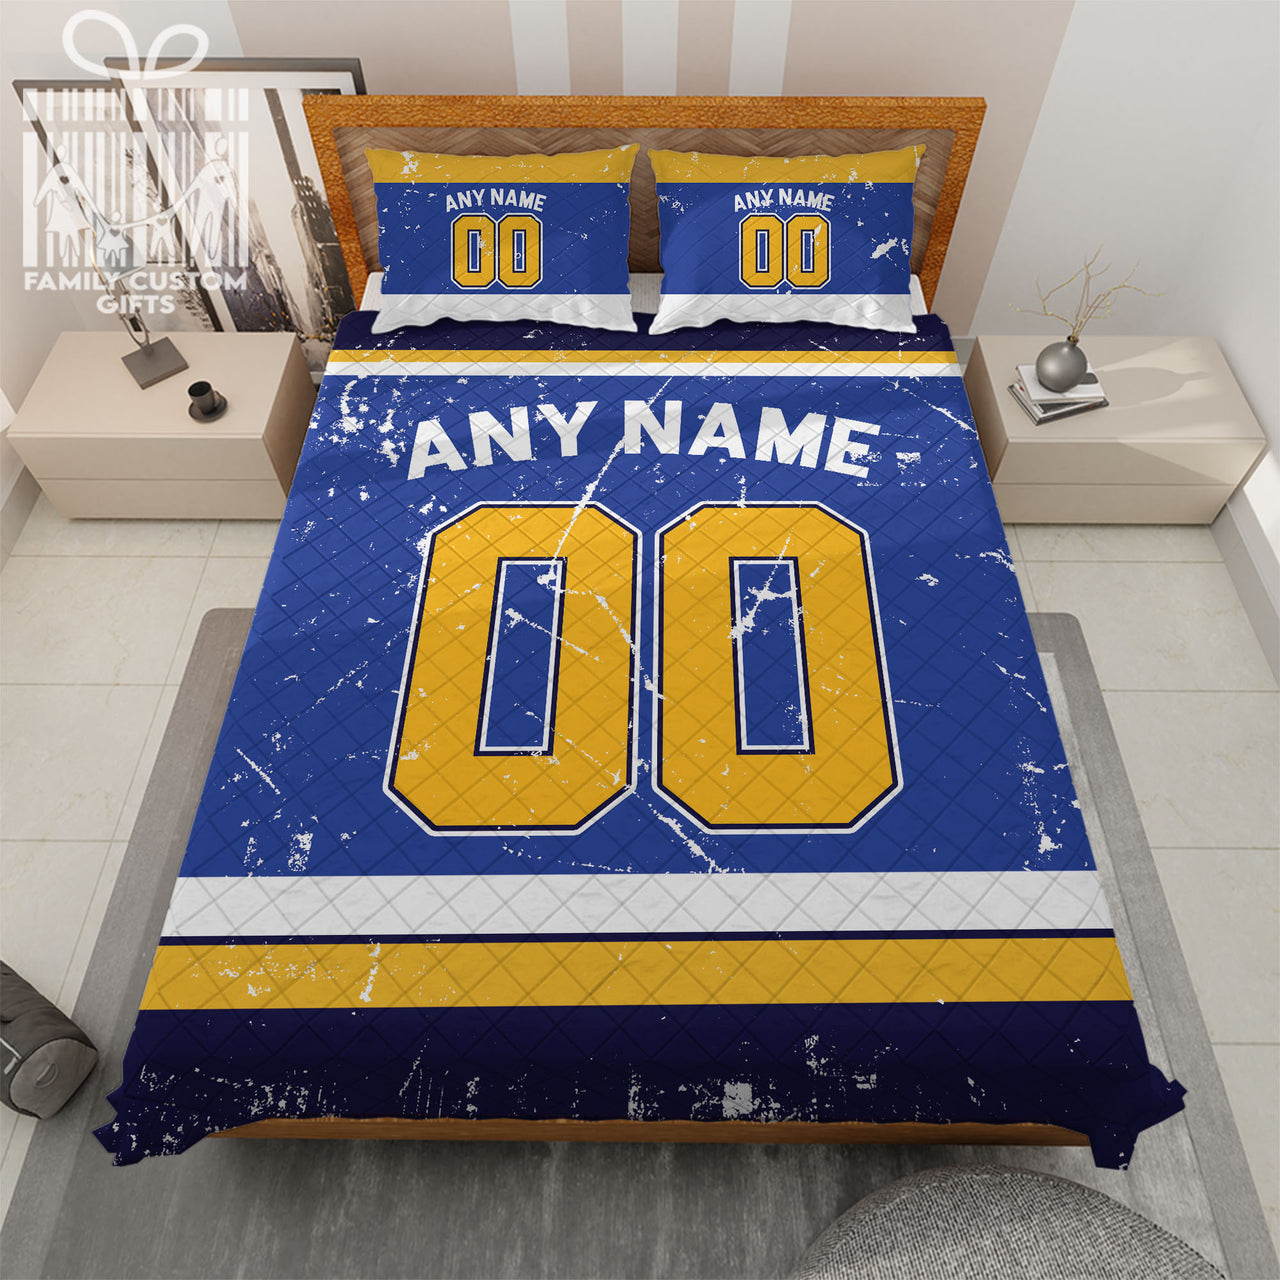 Custom Quilt Sets  St. Louis Jersey Personalized Ice hockey Premium Quilt Bedding for Men Women